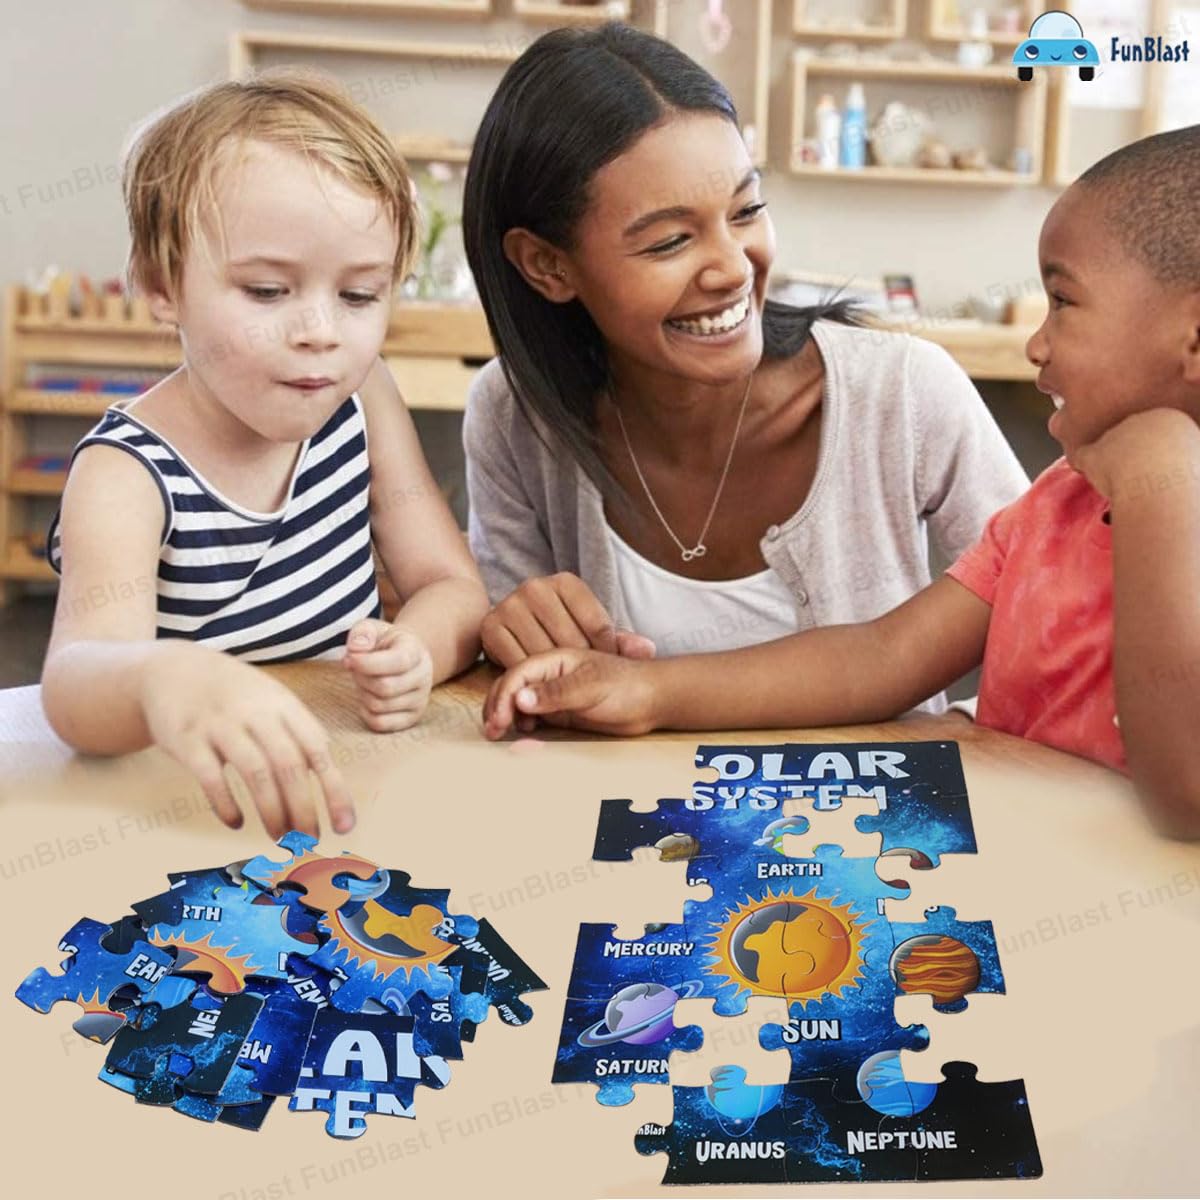 Solar System Jigsaw Puzzle for Kids Jigsaw Puzzle for Kids of Age 4-5 Years – 24 Pcs (Size 30X22 cm)